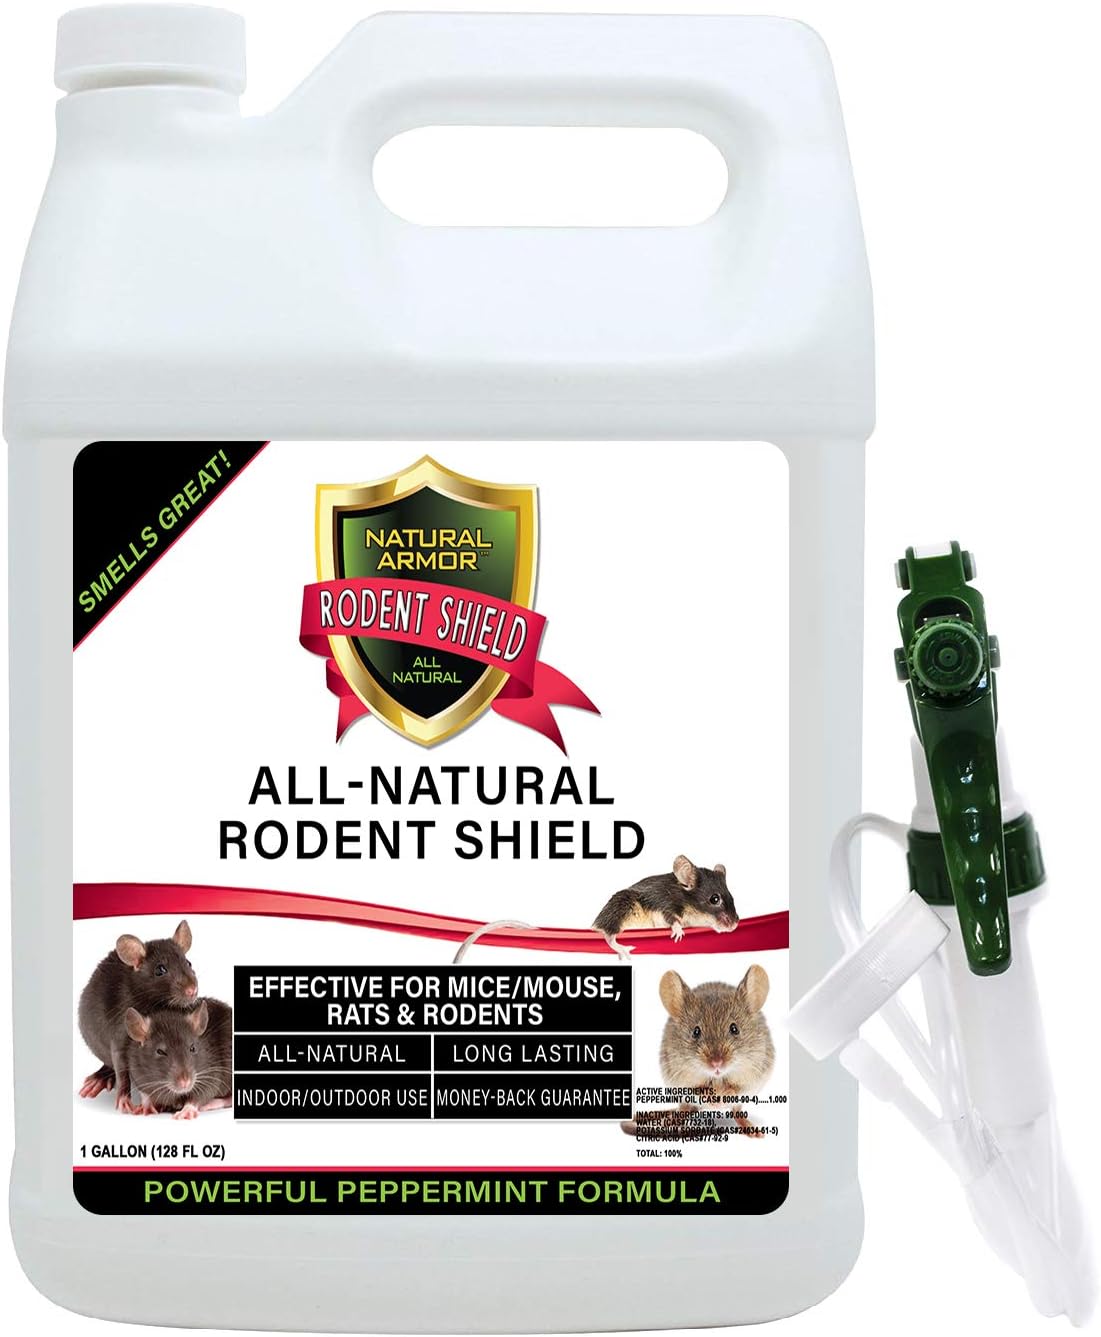 Peppermint Repellent for Mice/Mouse, Rats & Rodents. [...]